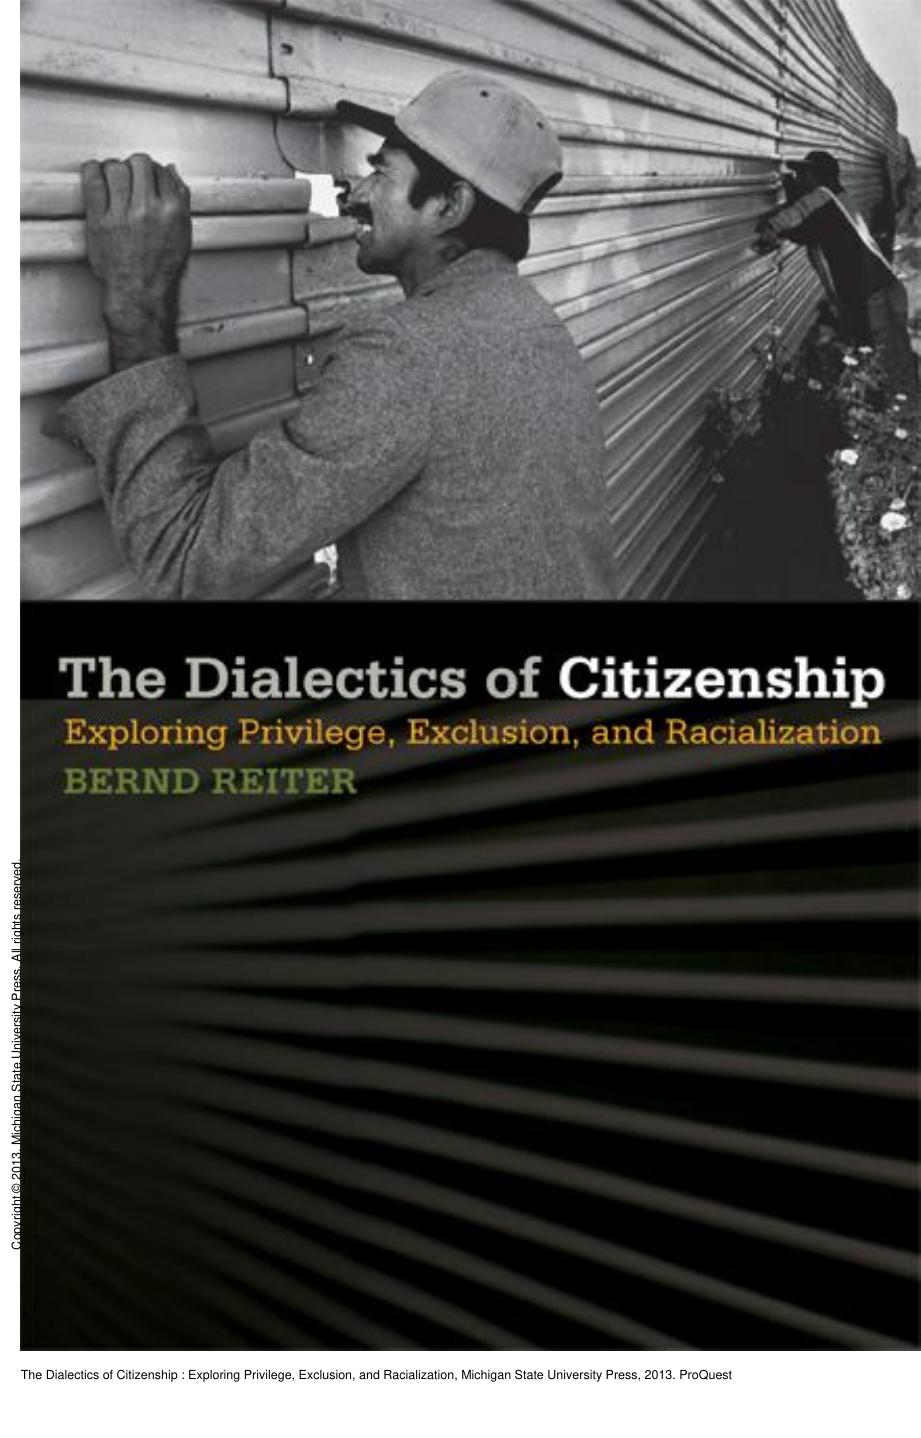 The Dialectics of Citizenship : Exploring Privilege, Exclusion, and Racialization by Bernd Reiter